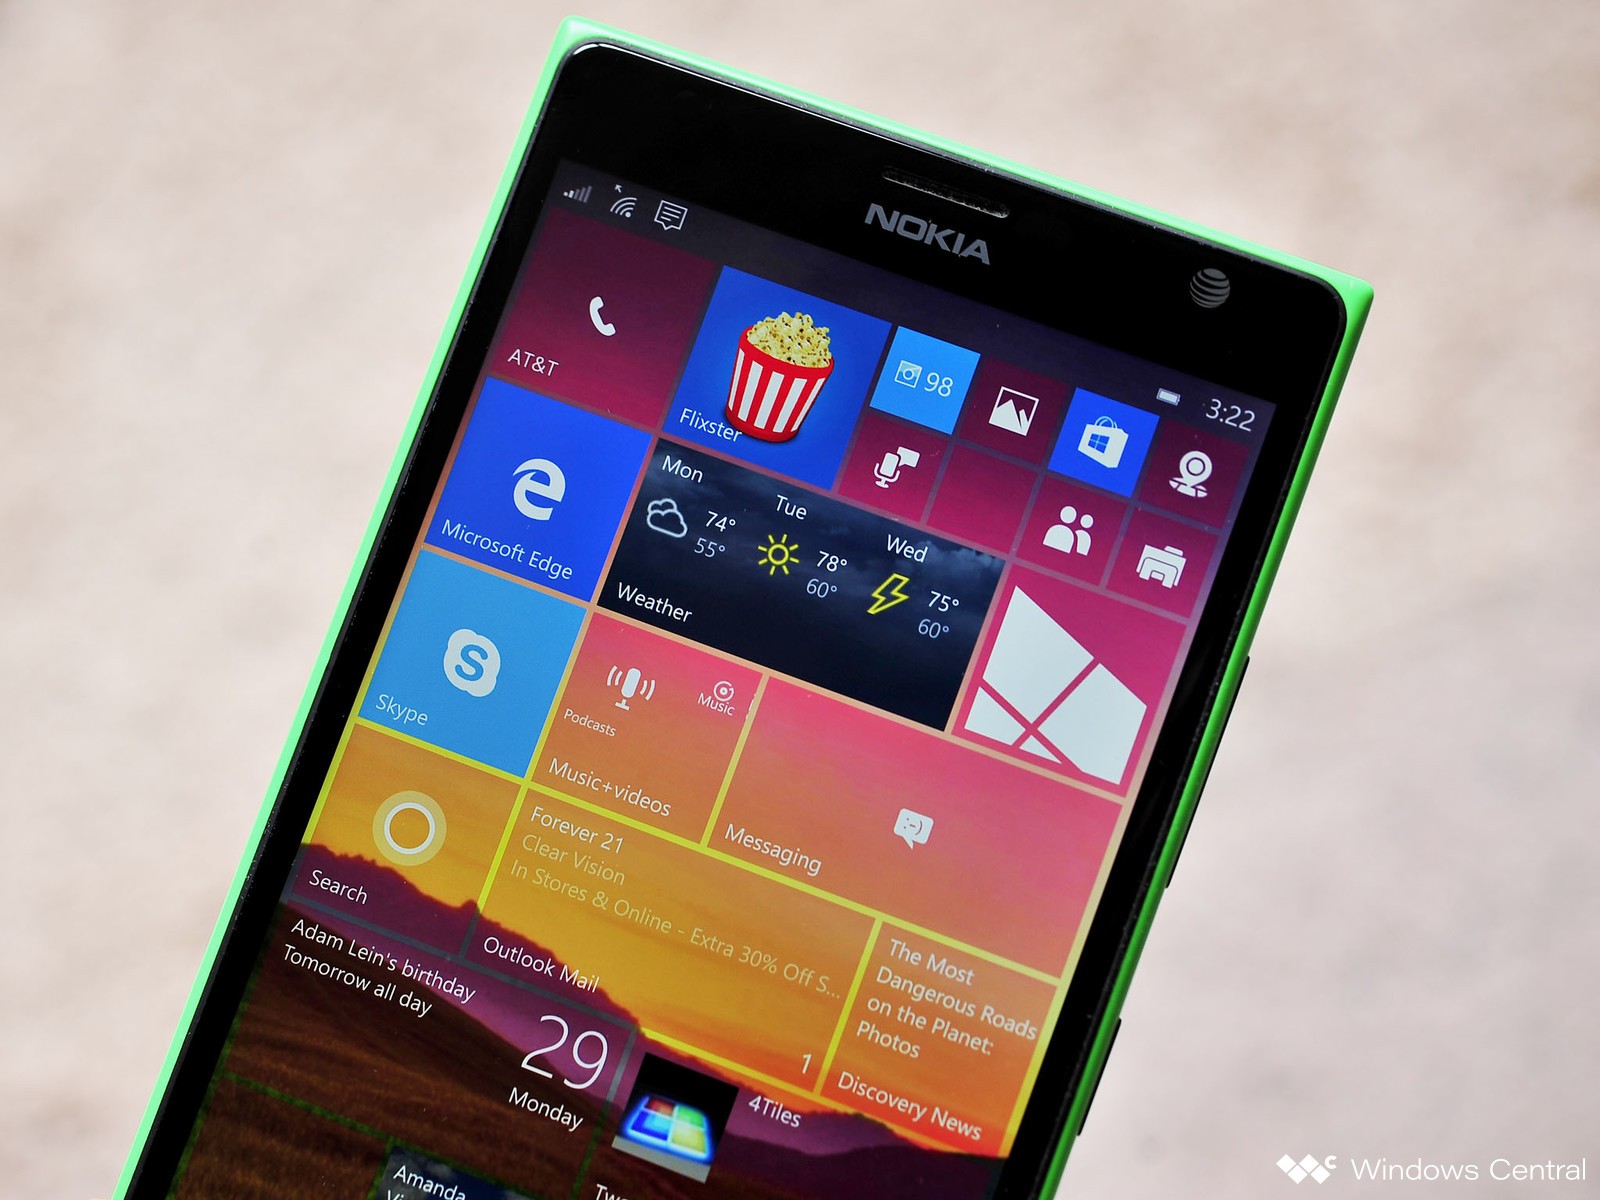 Http - //www - Windowscentral - Com/sites/wpcentral - Windows 10 Nokia Phone - HD Wallpaper 